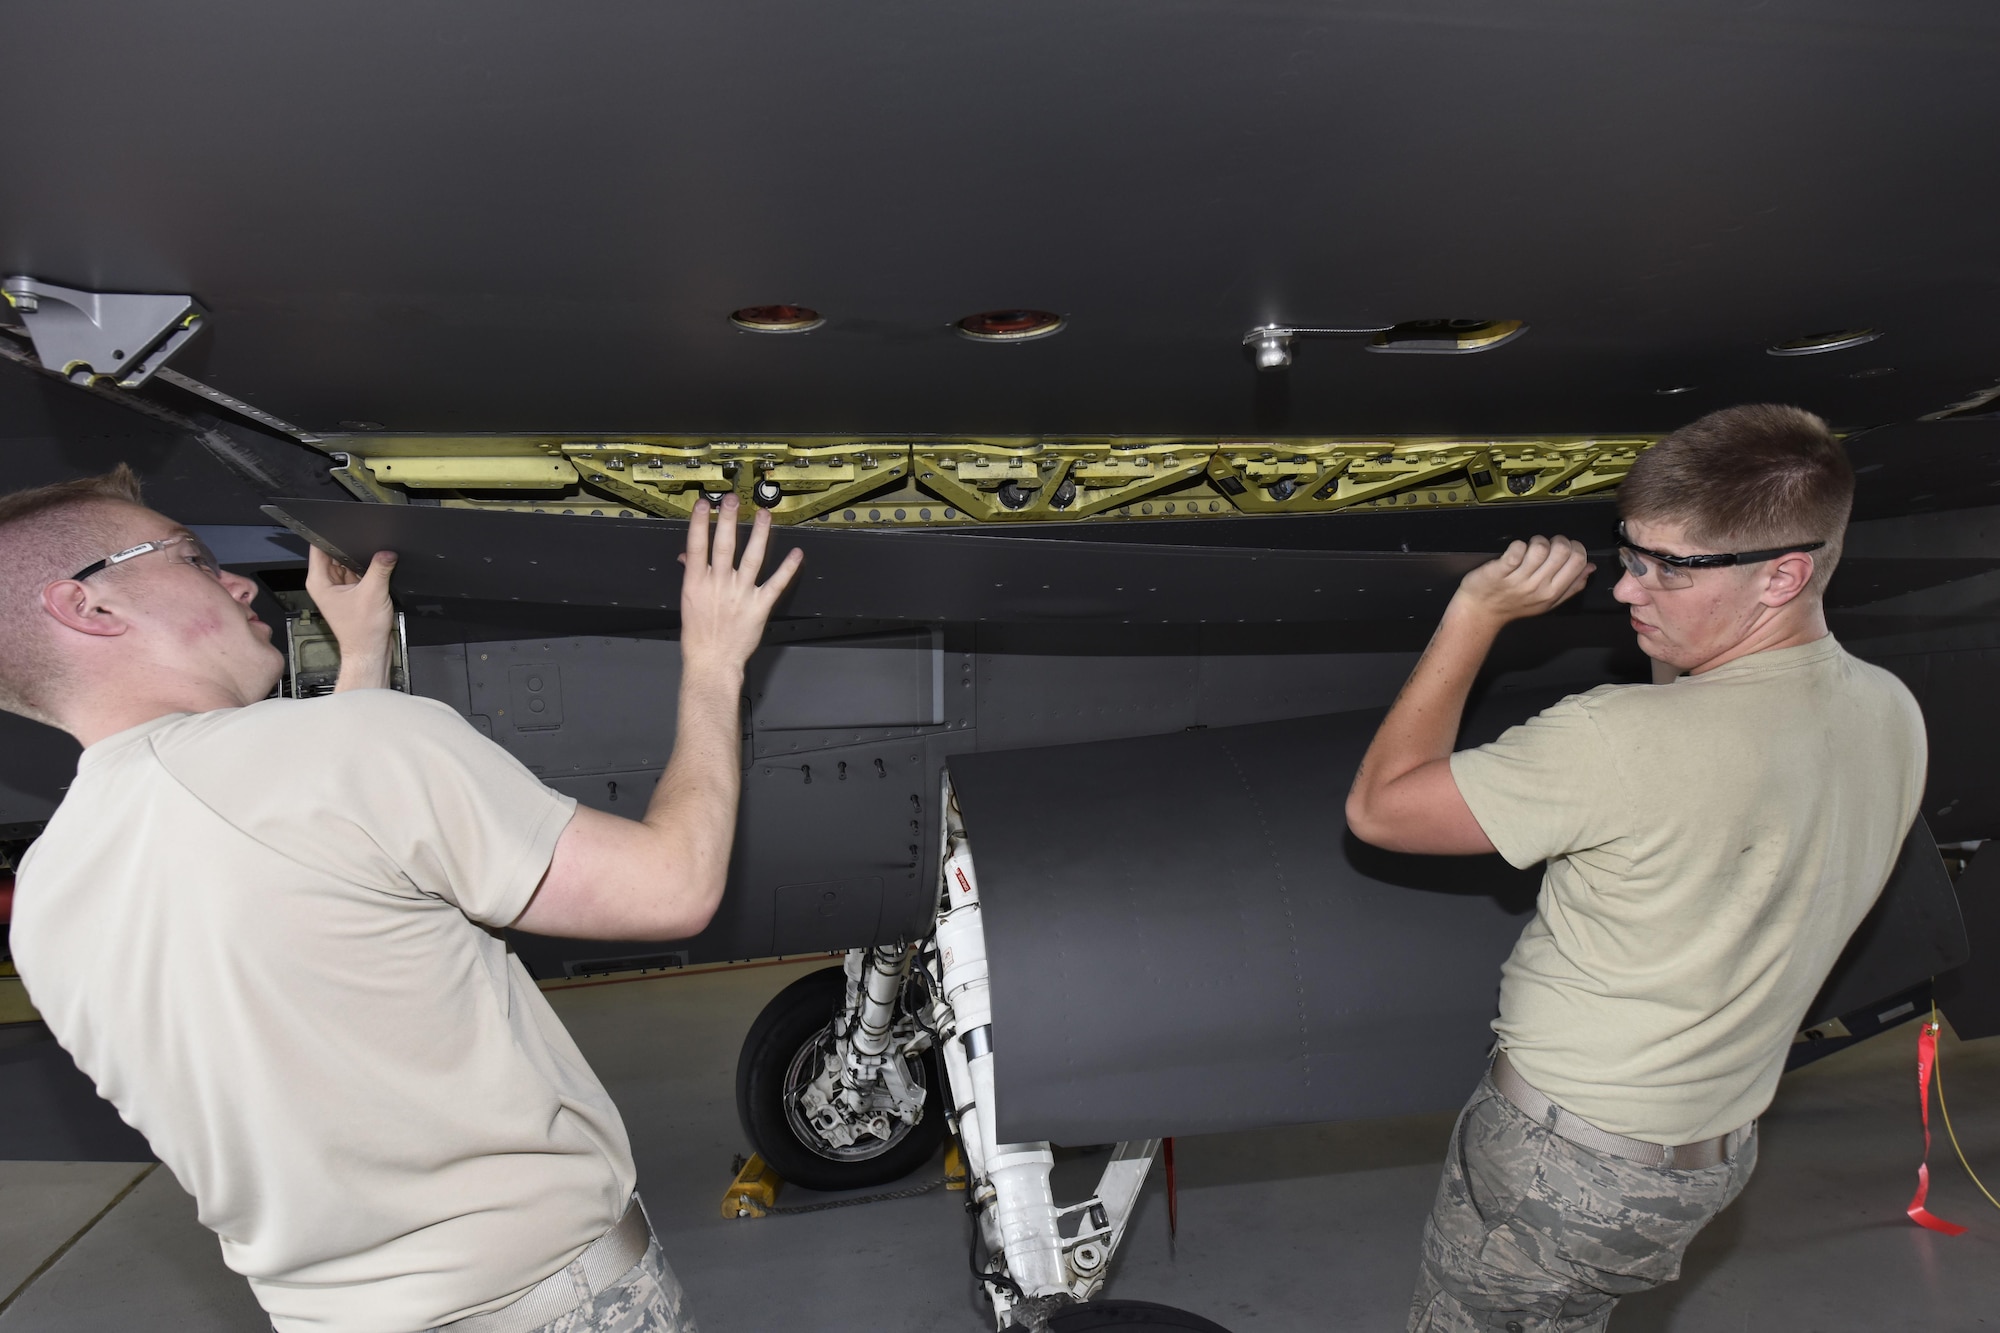 Airman 1st Class Joseph Schuch, and Senior Airman Austin Cole, 114th Aircraft Maintenance Squadron phase mechanics, removed a panel from under the wing of an F-16 during the De-paneling Phase of a phase maintenance inspection at Joe Foss Field, July 8, 2017.  Each aircraft is required to go through a phase inspection every 400 flight hours to ensure all systems are functioning with in Air Force regulations.  (U.S. Air National Guard photo by Master Sgt. Christopher Stewart/Released)